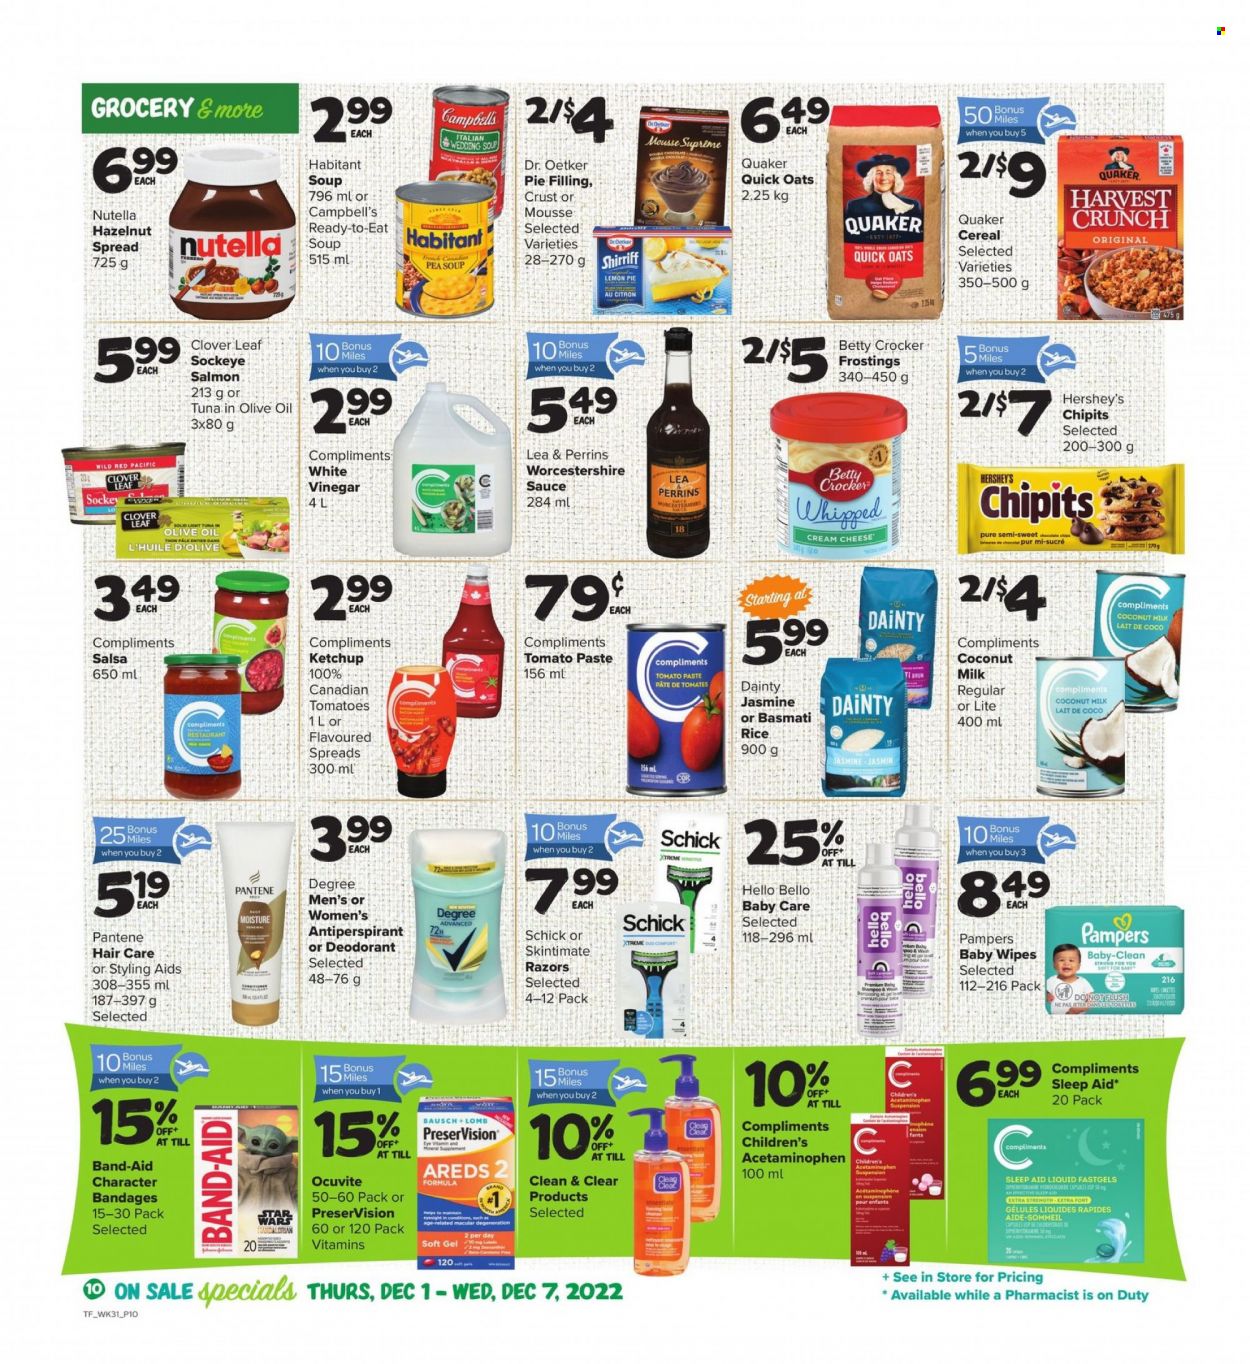 thumbnail - Thrifty Foods Flyer - December 01, 2022 - December 07, 2022 - Sales products - salmon, tuna, Campbell's, soup, Quaker, cream cheese, cheese, Dr. Oetker, Clover, Hershey's, pie filling, oats, coconut milk, tomato paste, cereals, Quick Oats, basmati rice, rice, worcestershire sauce, salsa, hazelnut spread, wipes, baby wipes, Clean & Clear, conditioner, anti-perspirant, Schick, band-aid, shampoo, ketchup, Pampers, Pantene, Nutella, Ocuvite, Ferrero Rocher, deodorant. Page 10.